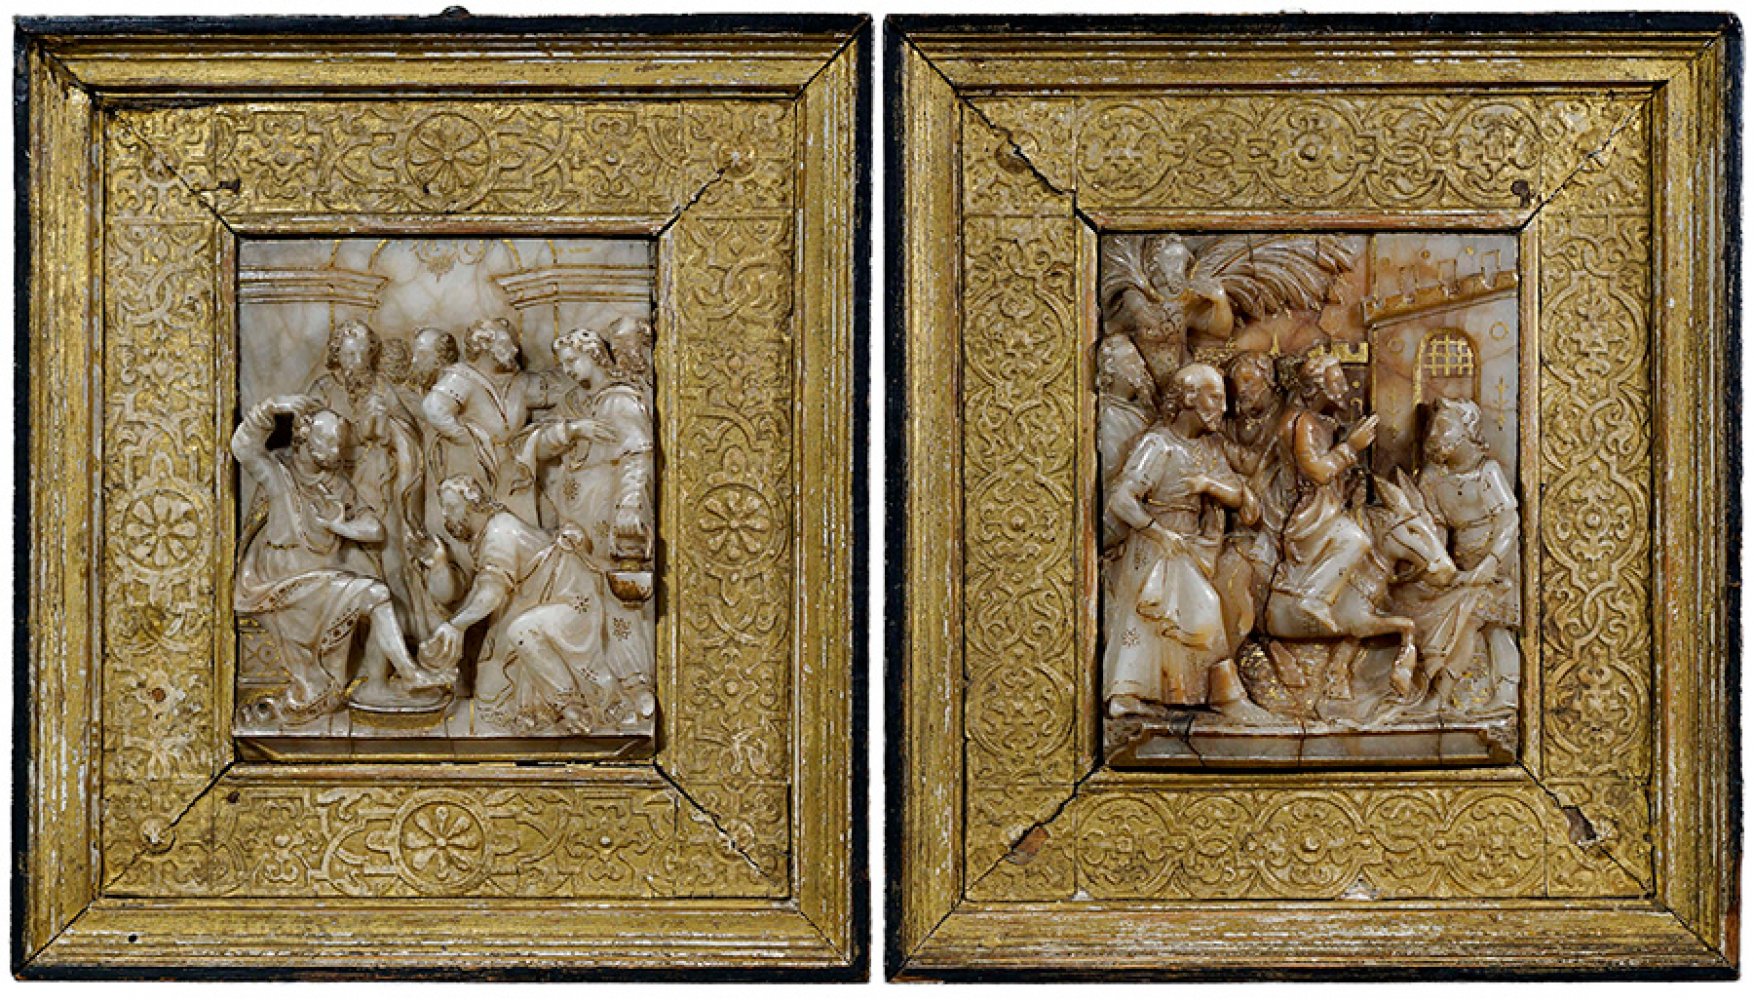 Mechelen, late 16th - early 17th century."The Entry of Jesus into Jerusalem" and "The Washing of the